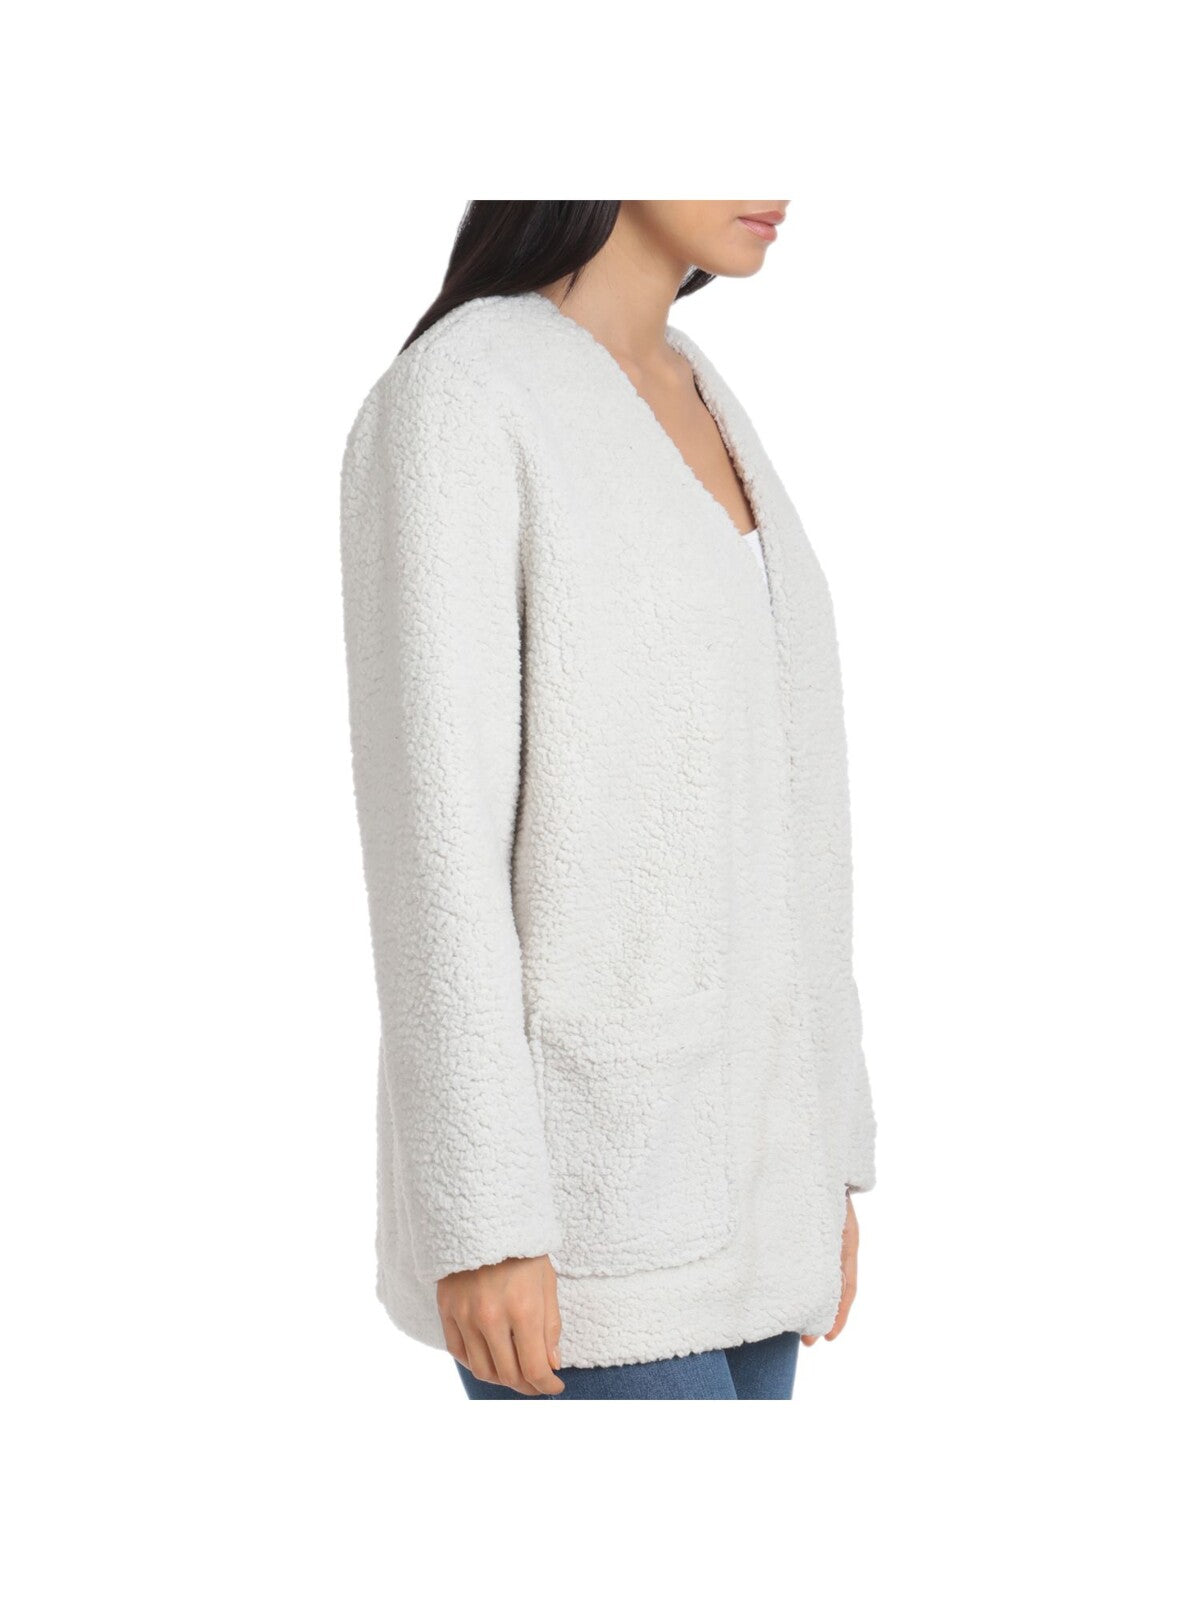 BAGATELLE Womens Pocketed Lined Long Sleeve Open Cardigan Sweater